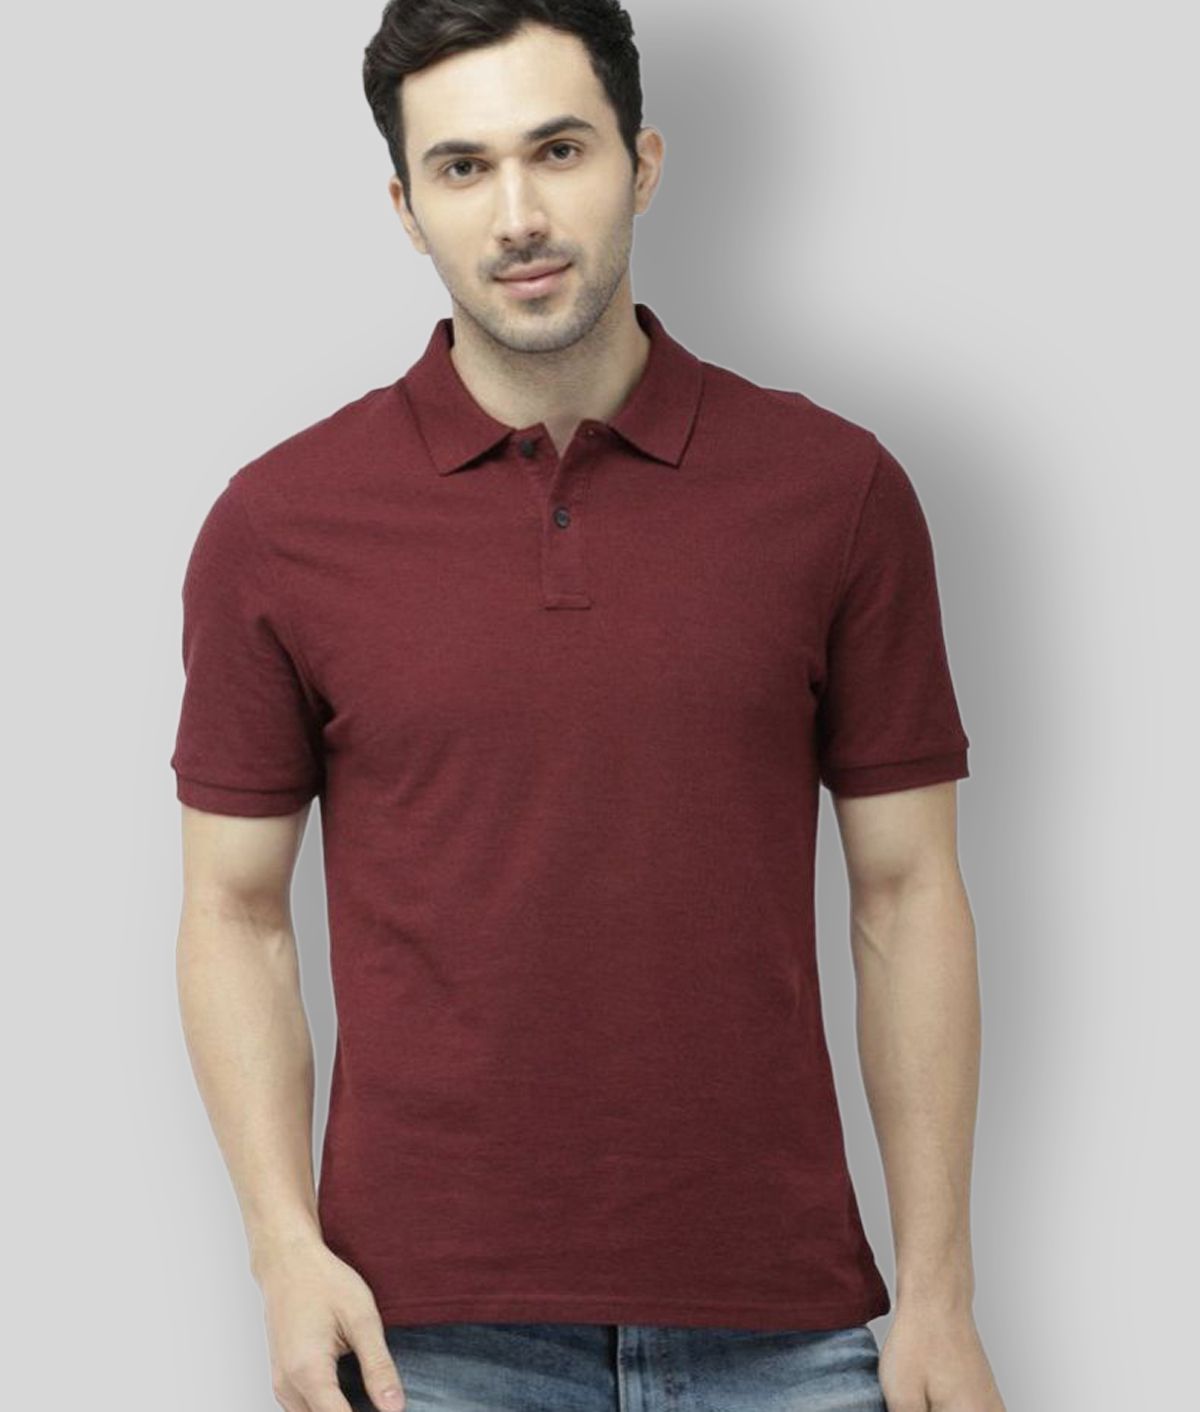     			FASHION365 - Maroon Cotton Blend Slim Fit Men's Polo T Shirt ( Pack of 1 )